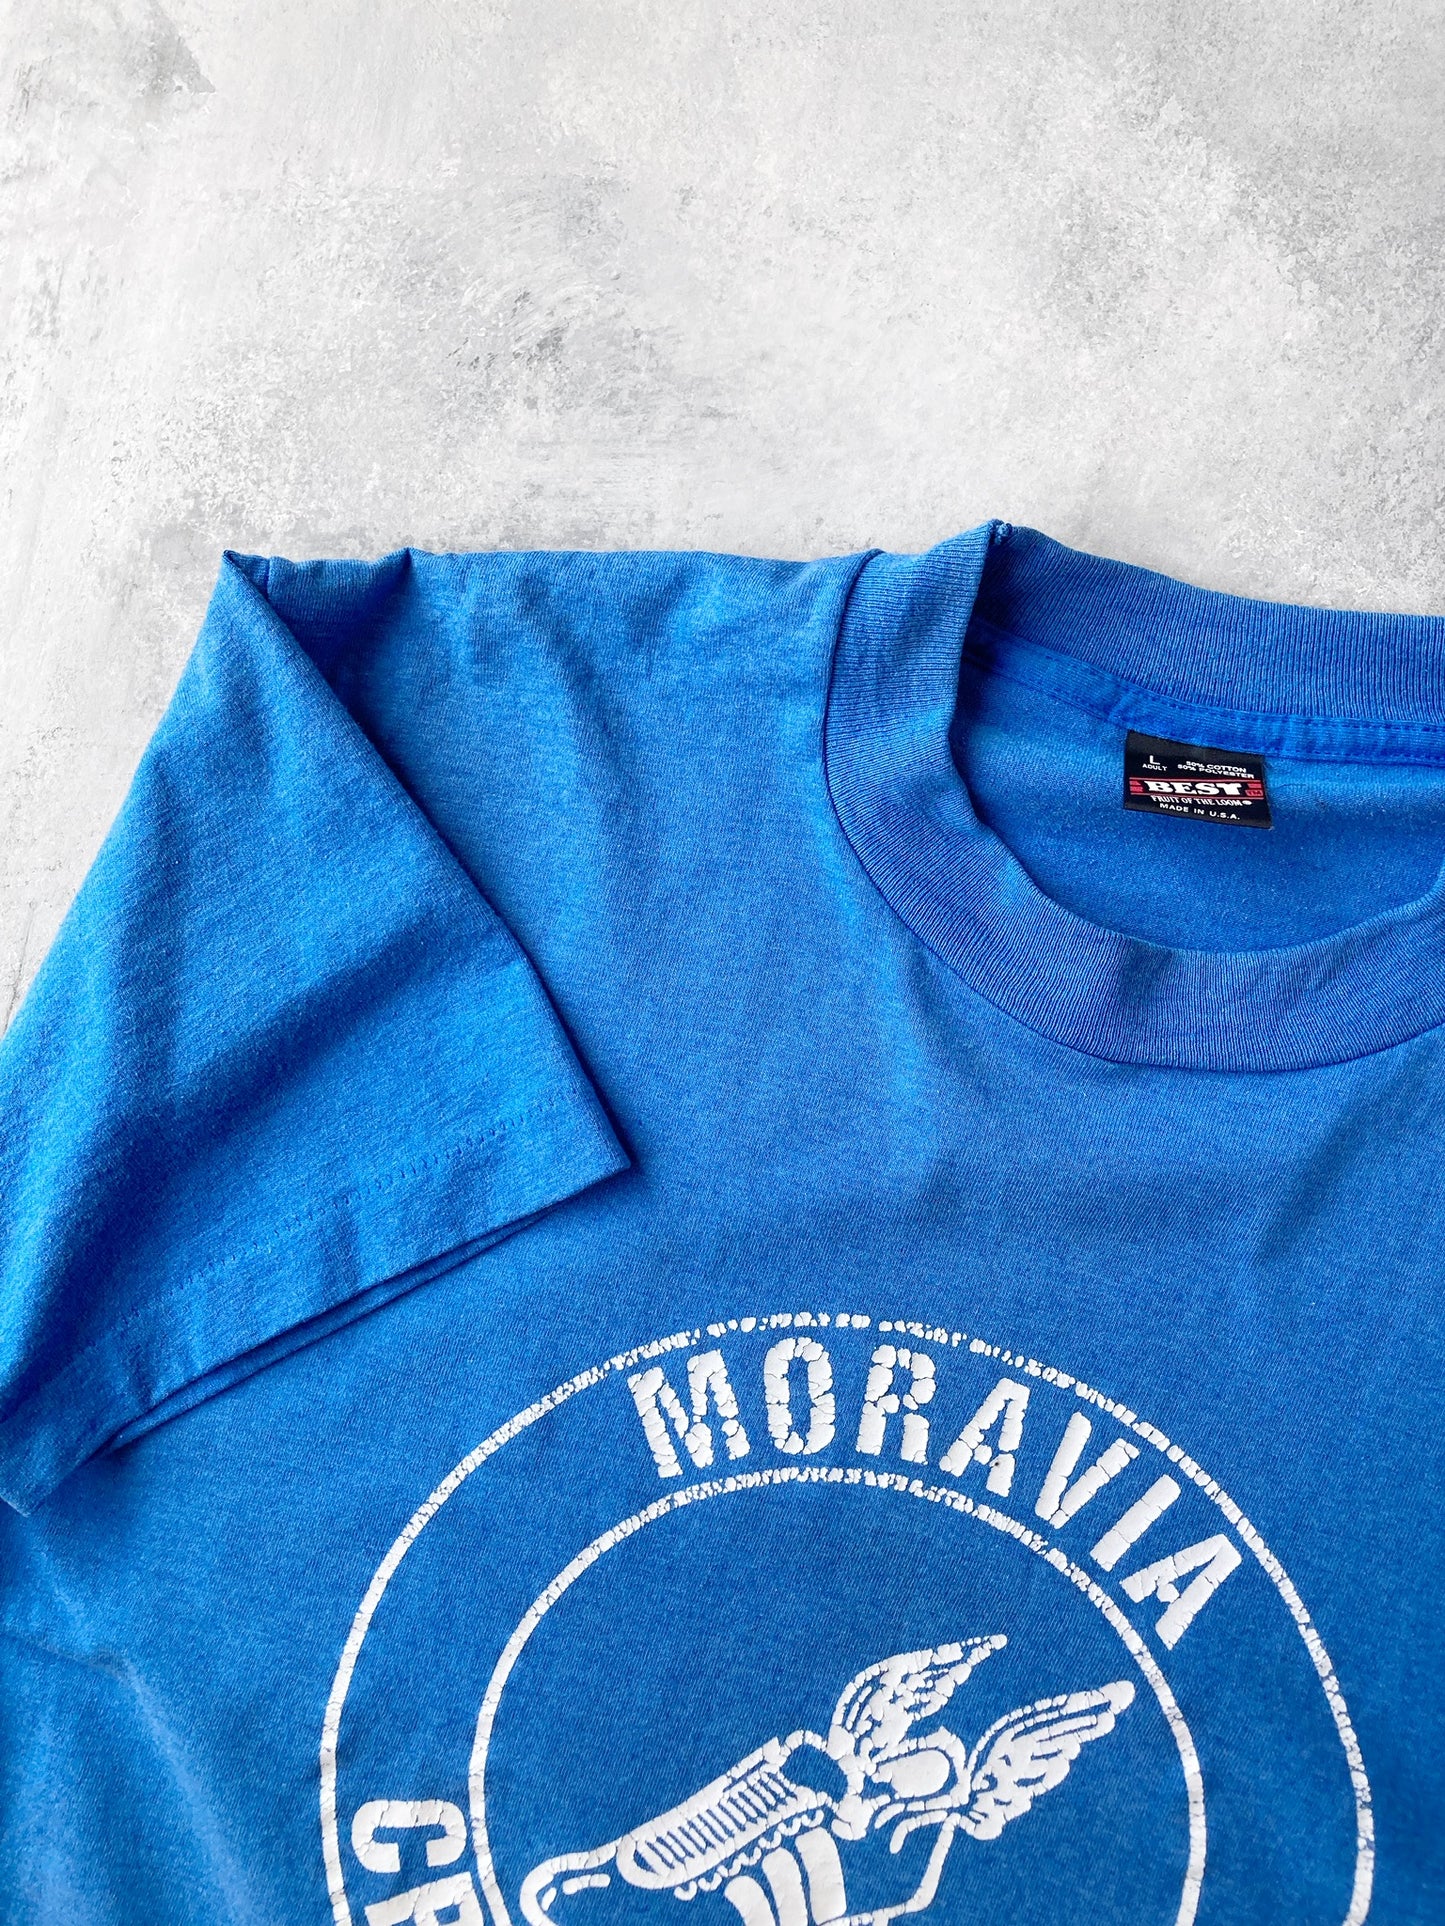 Moravia Cross Country T-Shirt 90's - Large